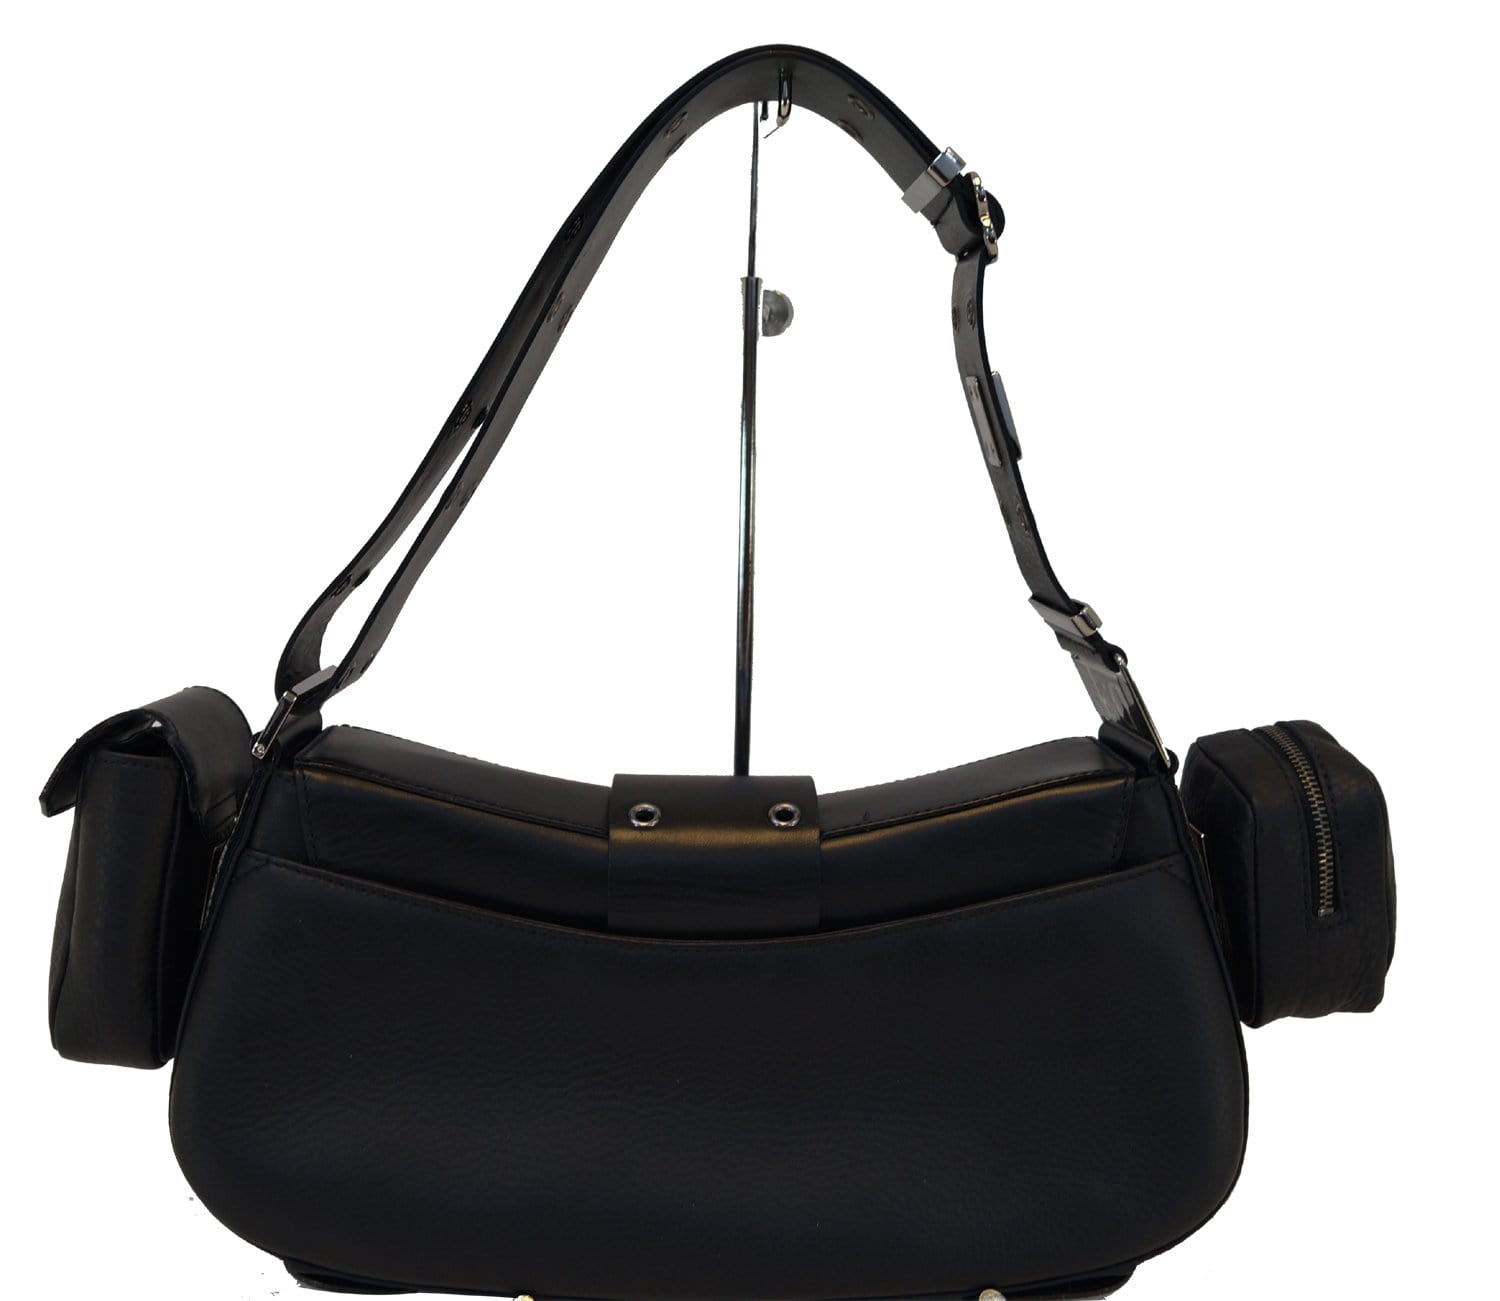 Beauriva Shoppers Bags in Natur and Black for Women